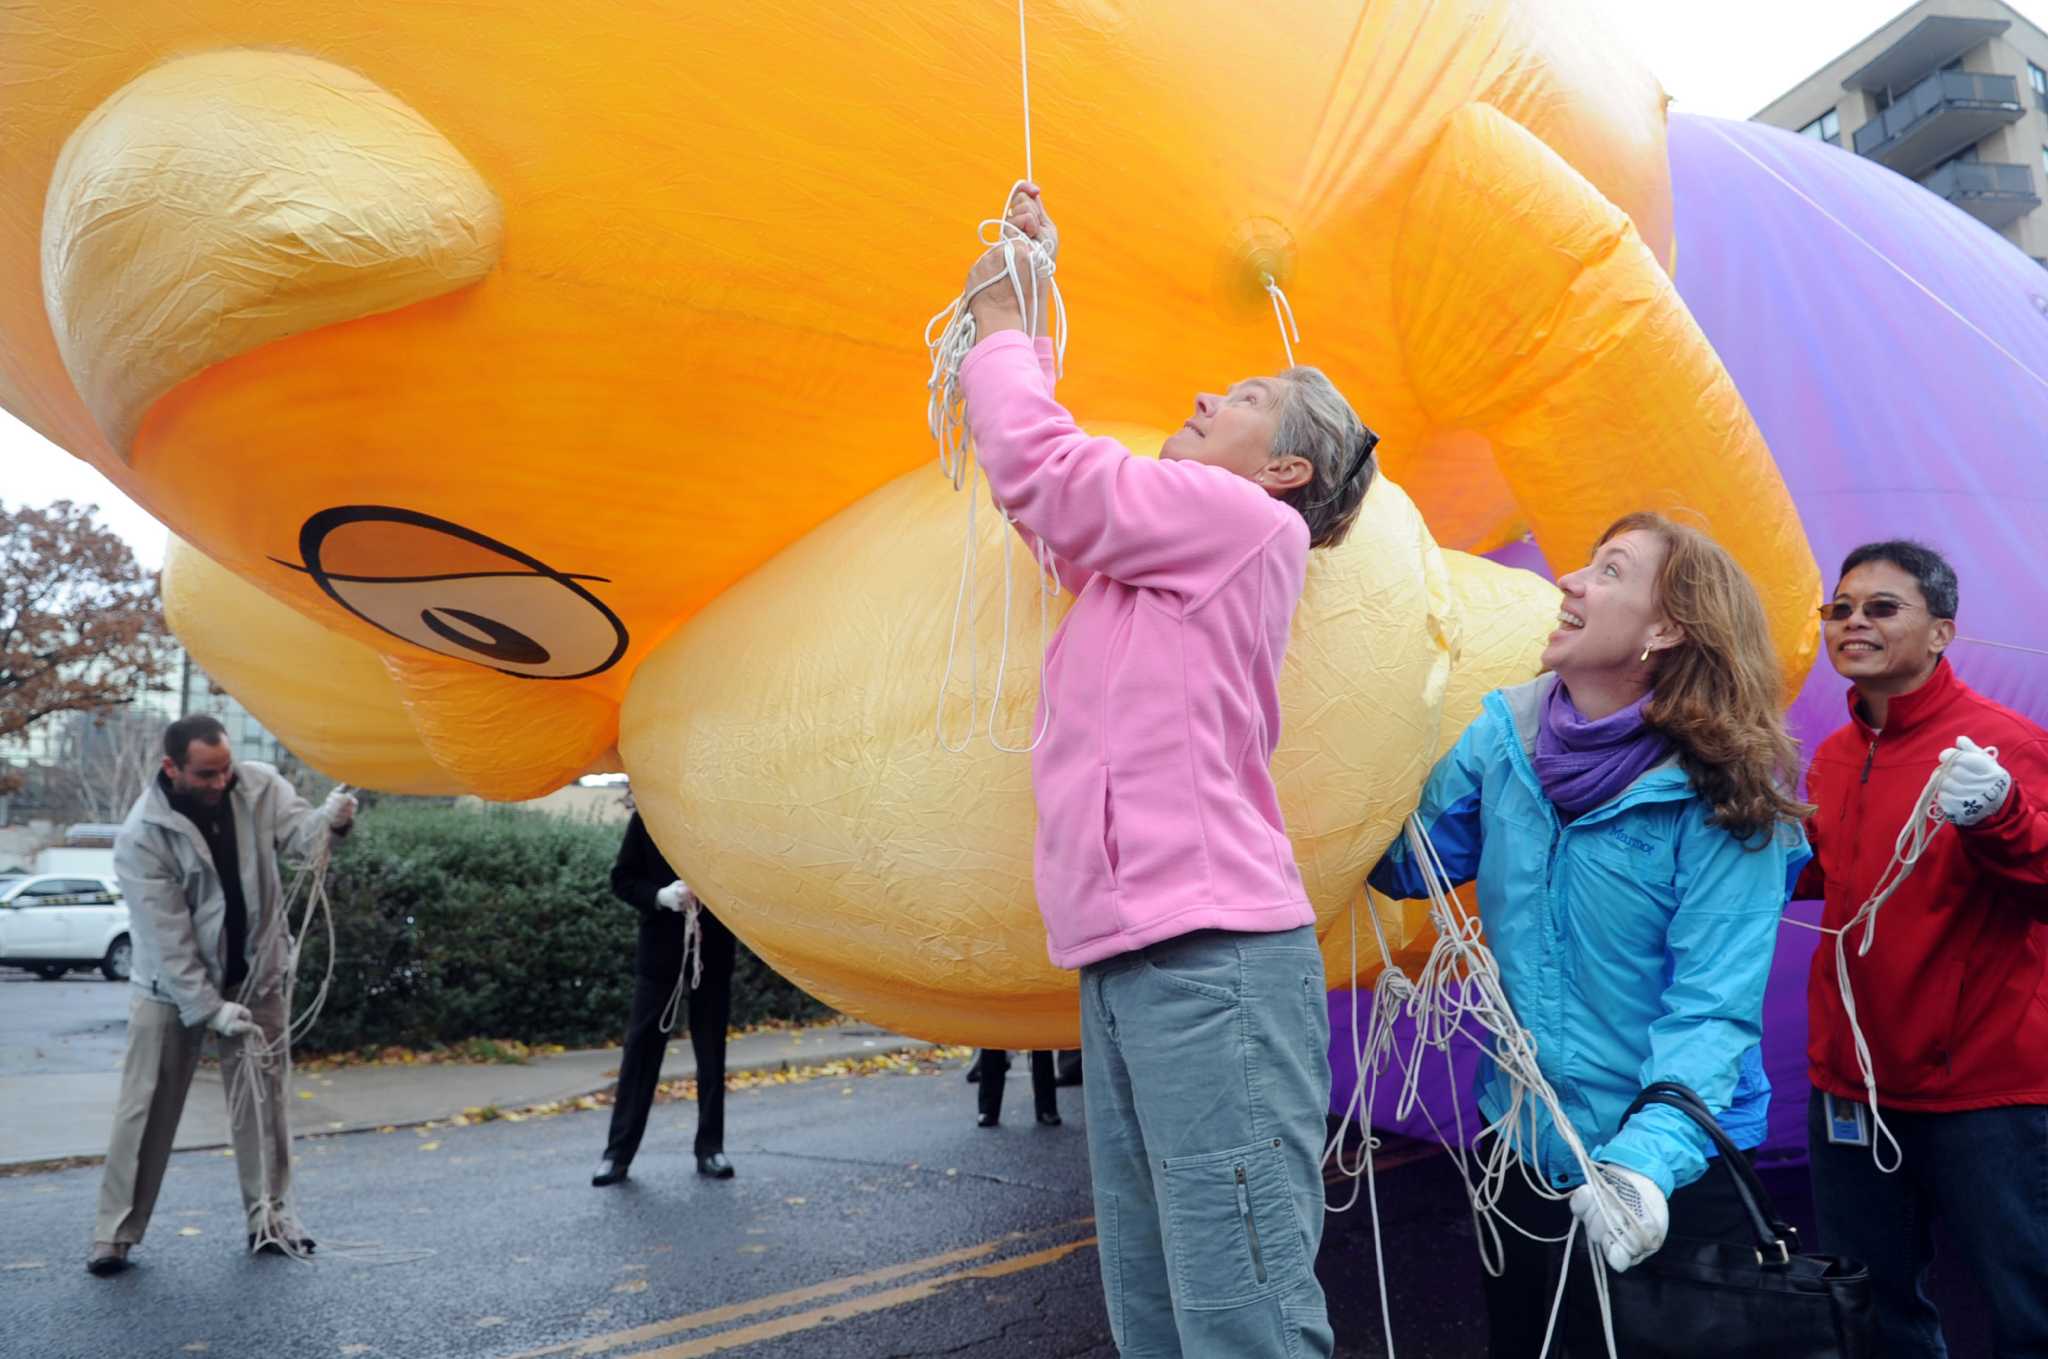 Lorax joins UBS Parade Spectacular - StamfordAdvocate